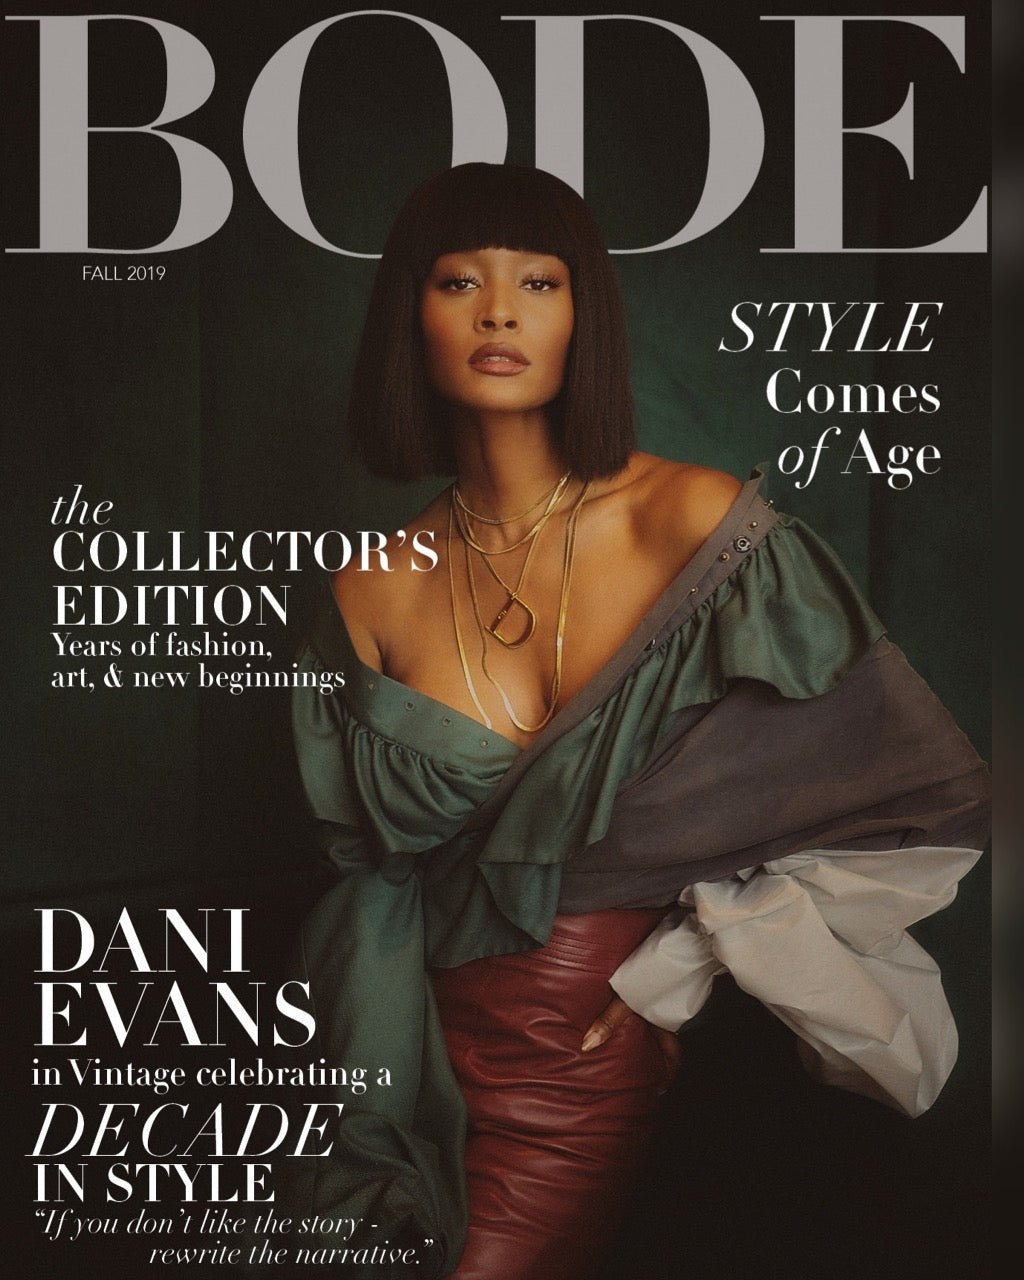 Vintage Christian Dior necklace from Vanessa's Vintage featured on the cover of Bode Magazine.